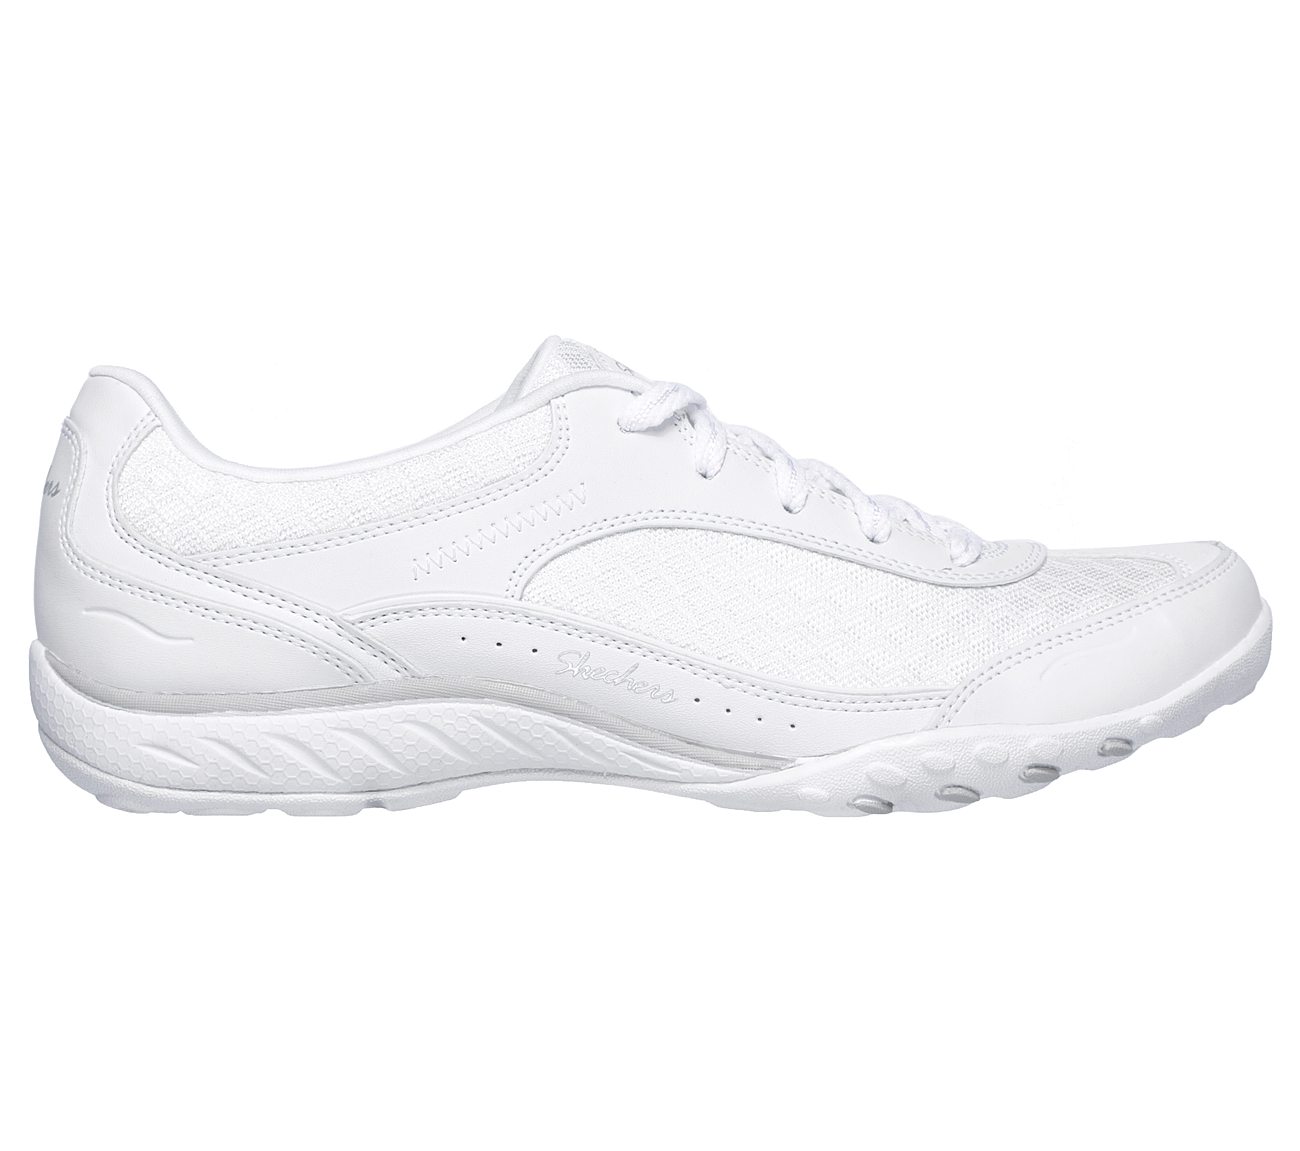 skechers relaxed fit mujer espana